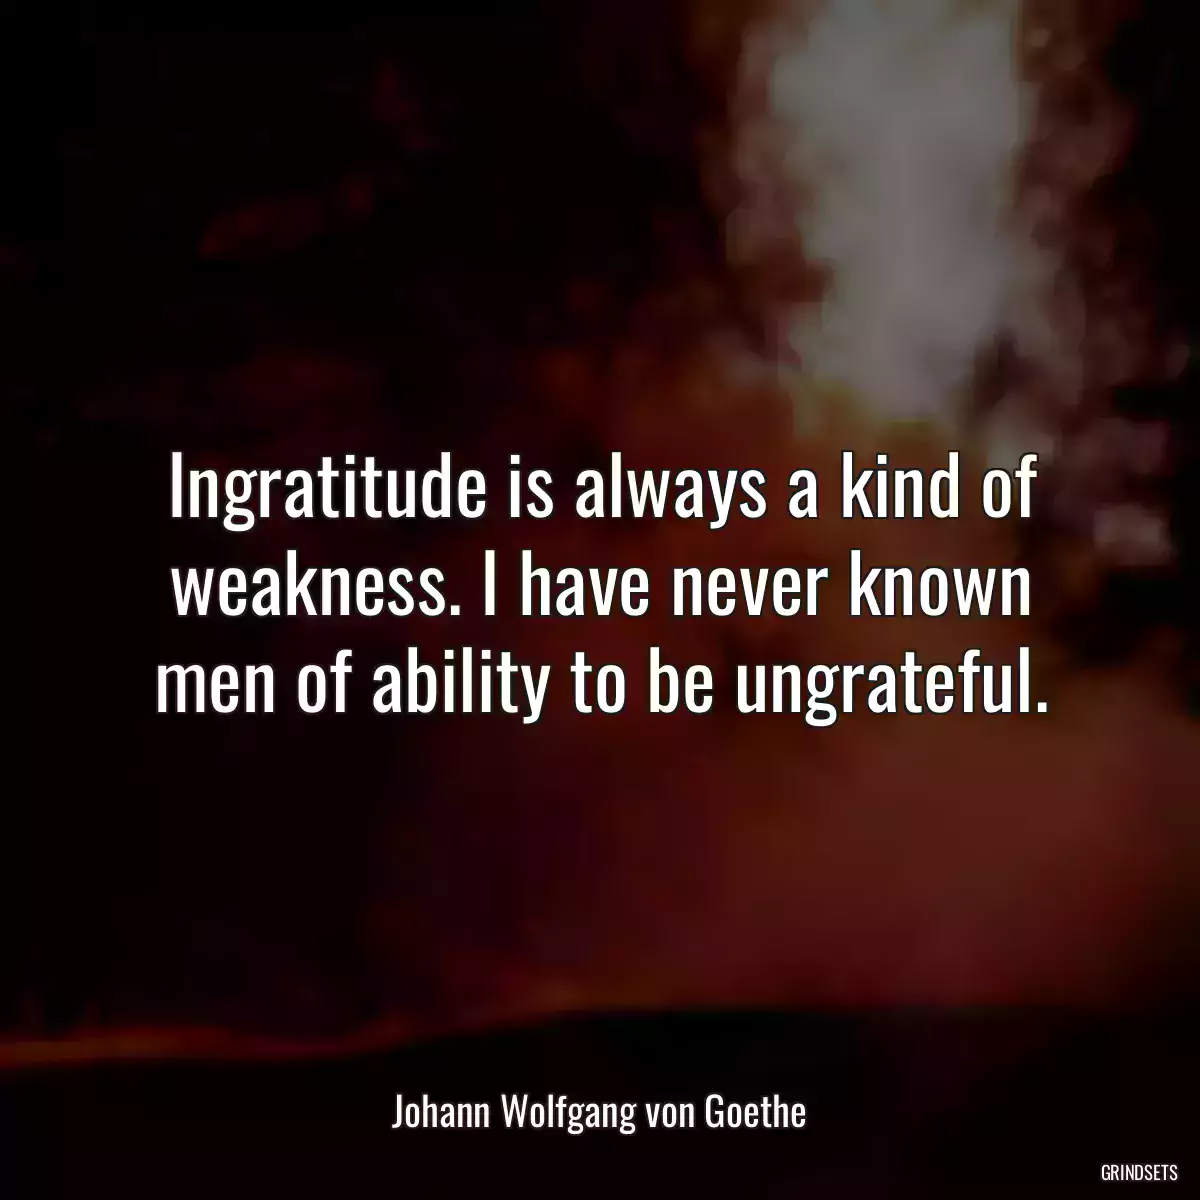 Ingratitude is always a kind of weakness. I have never known men of ability to be ungrateful.